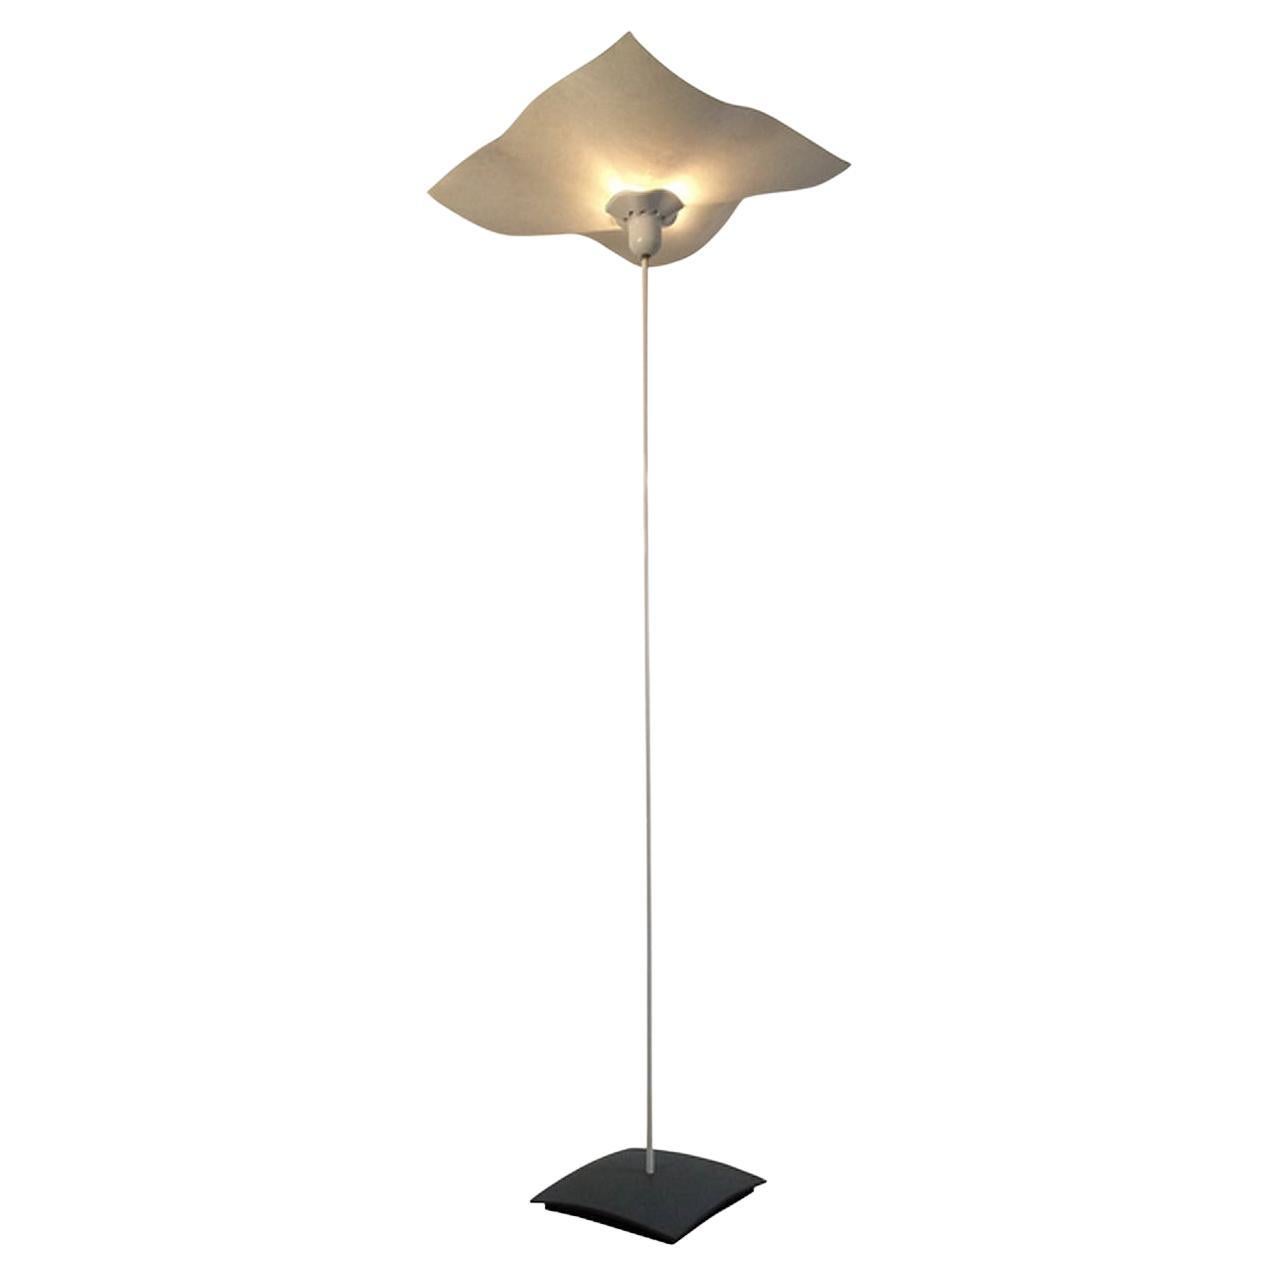 Floor lamp by Mario Bellini for Artemide, 1970s iconic Design For Sale